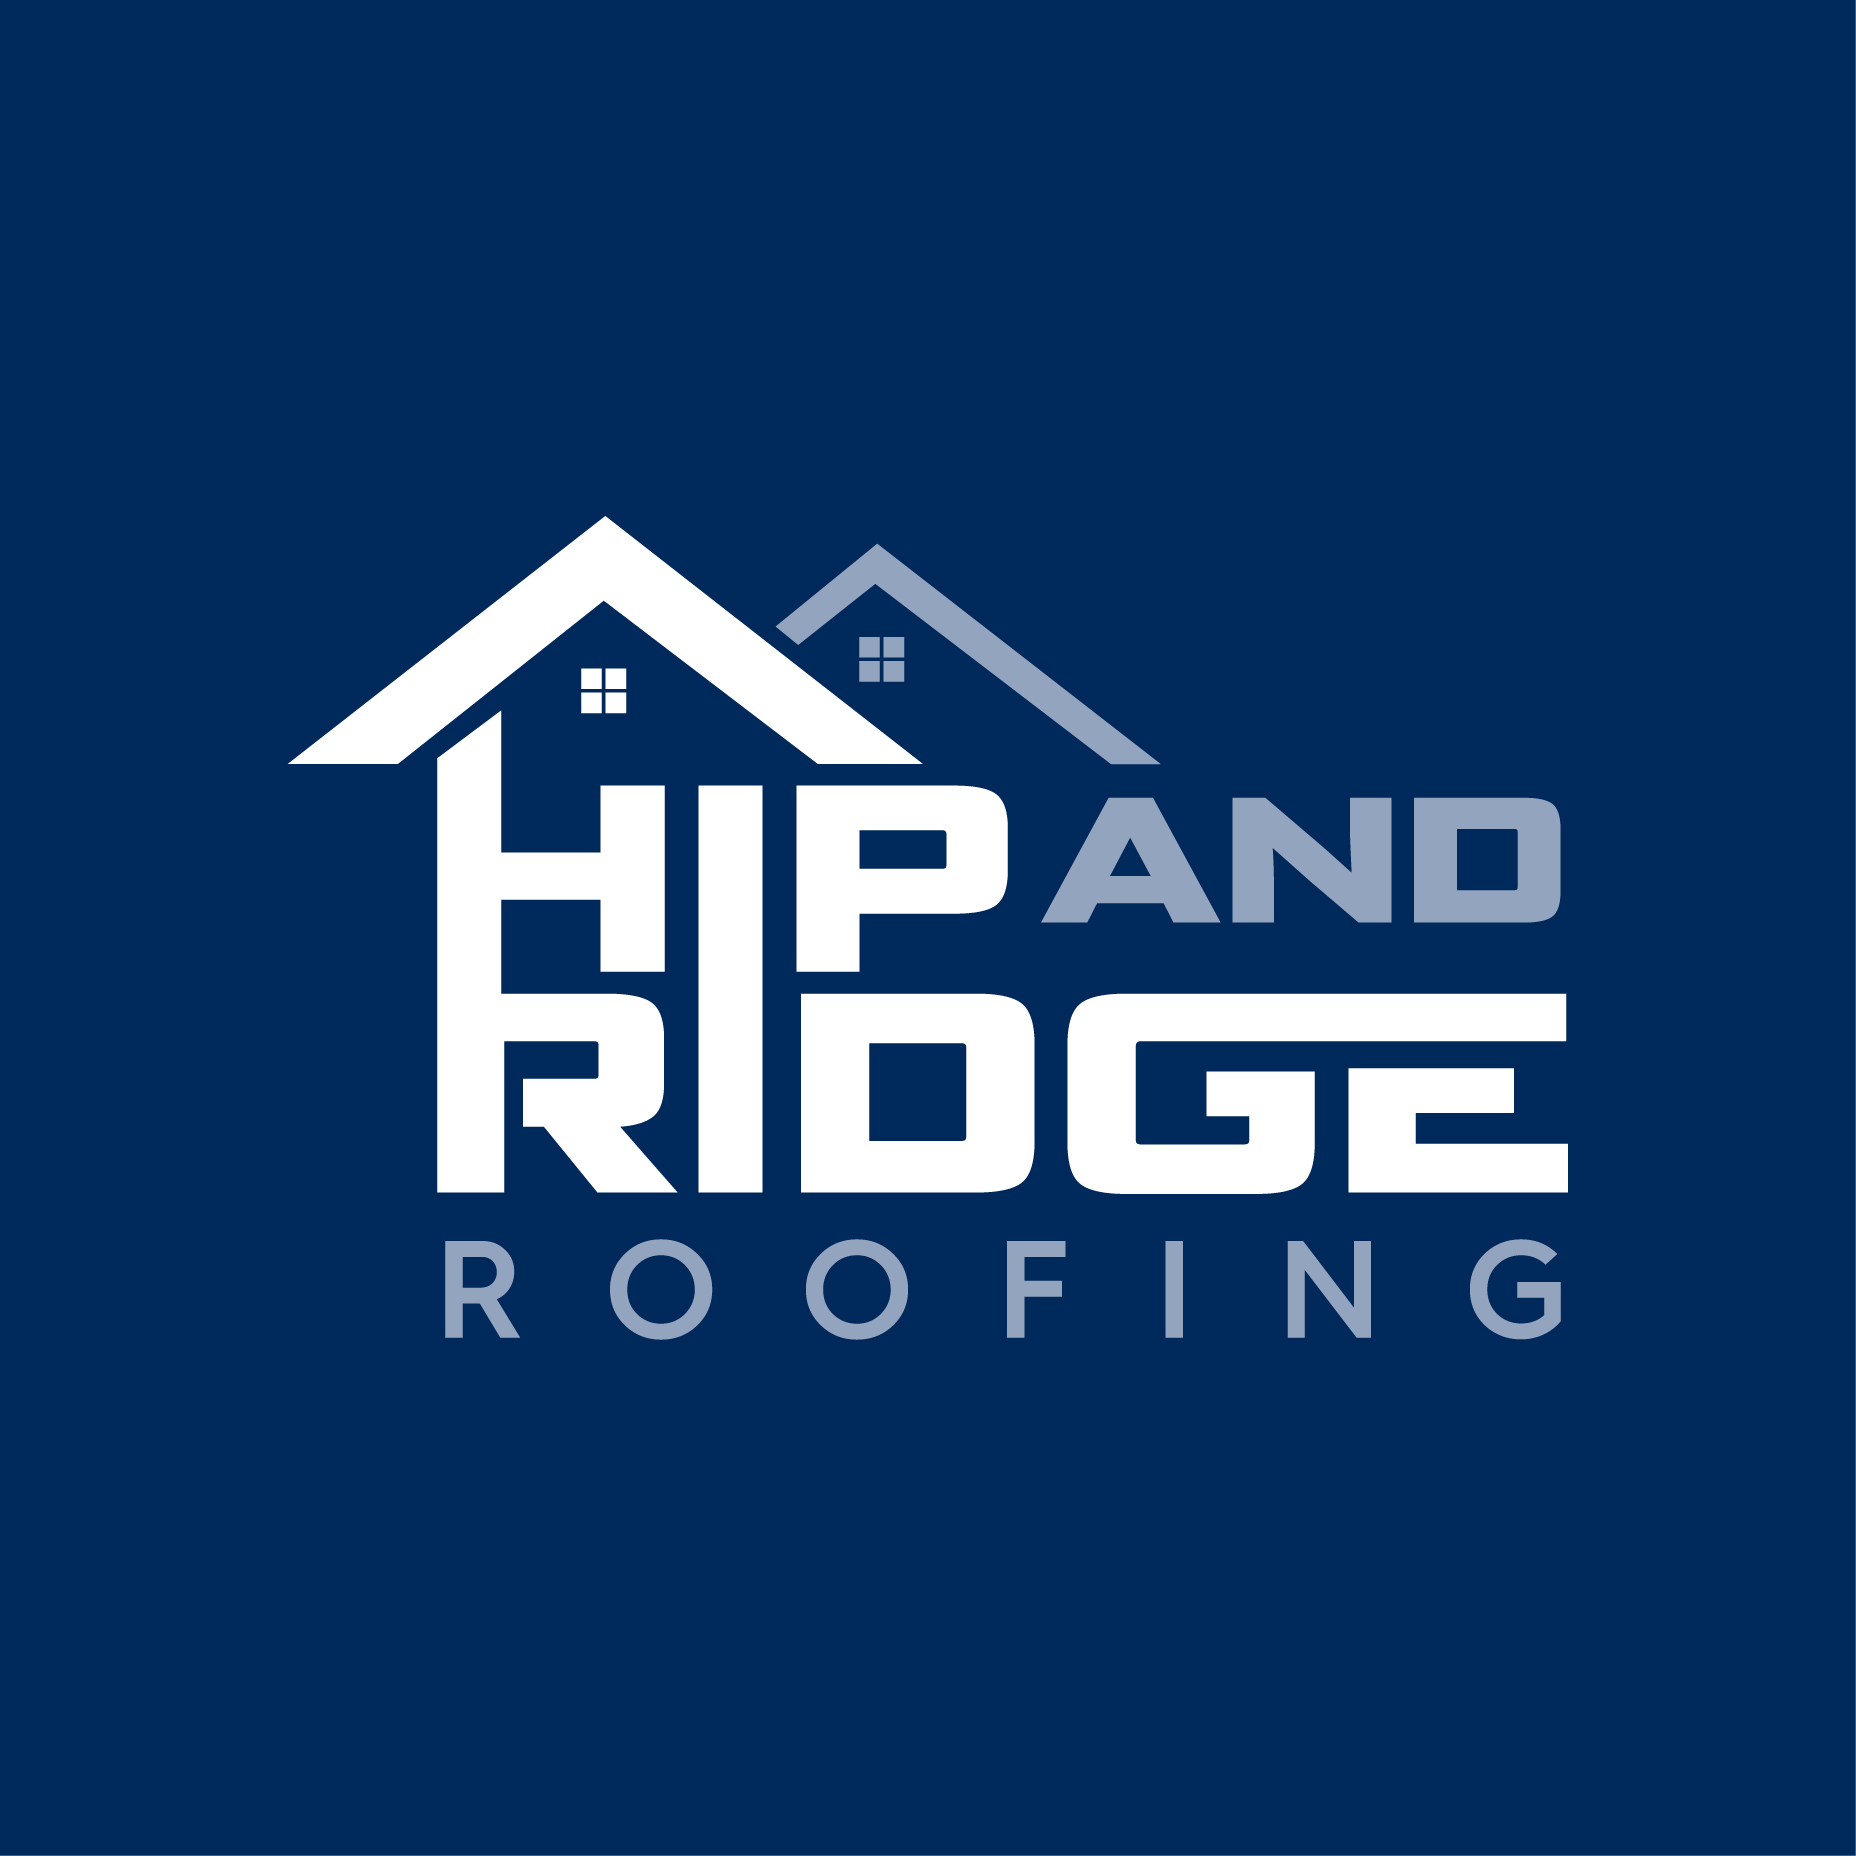 Hip and Ridge Roofing Logo